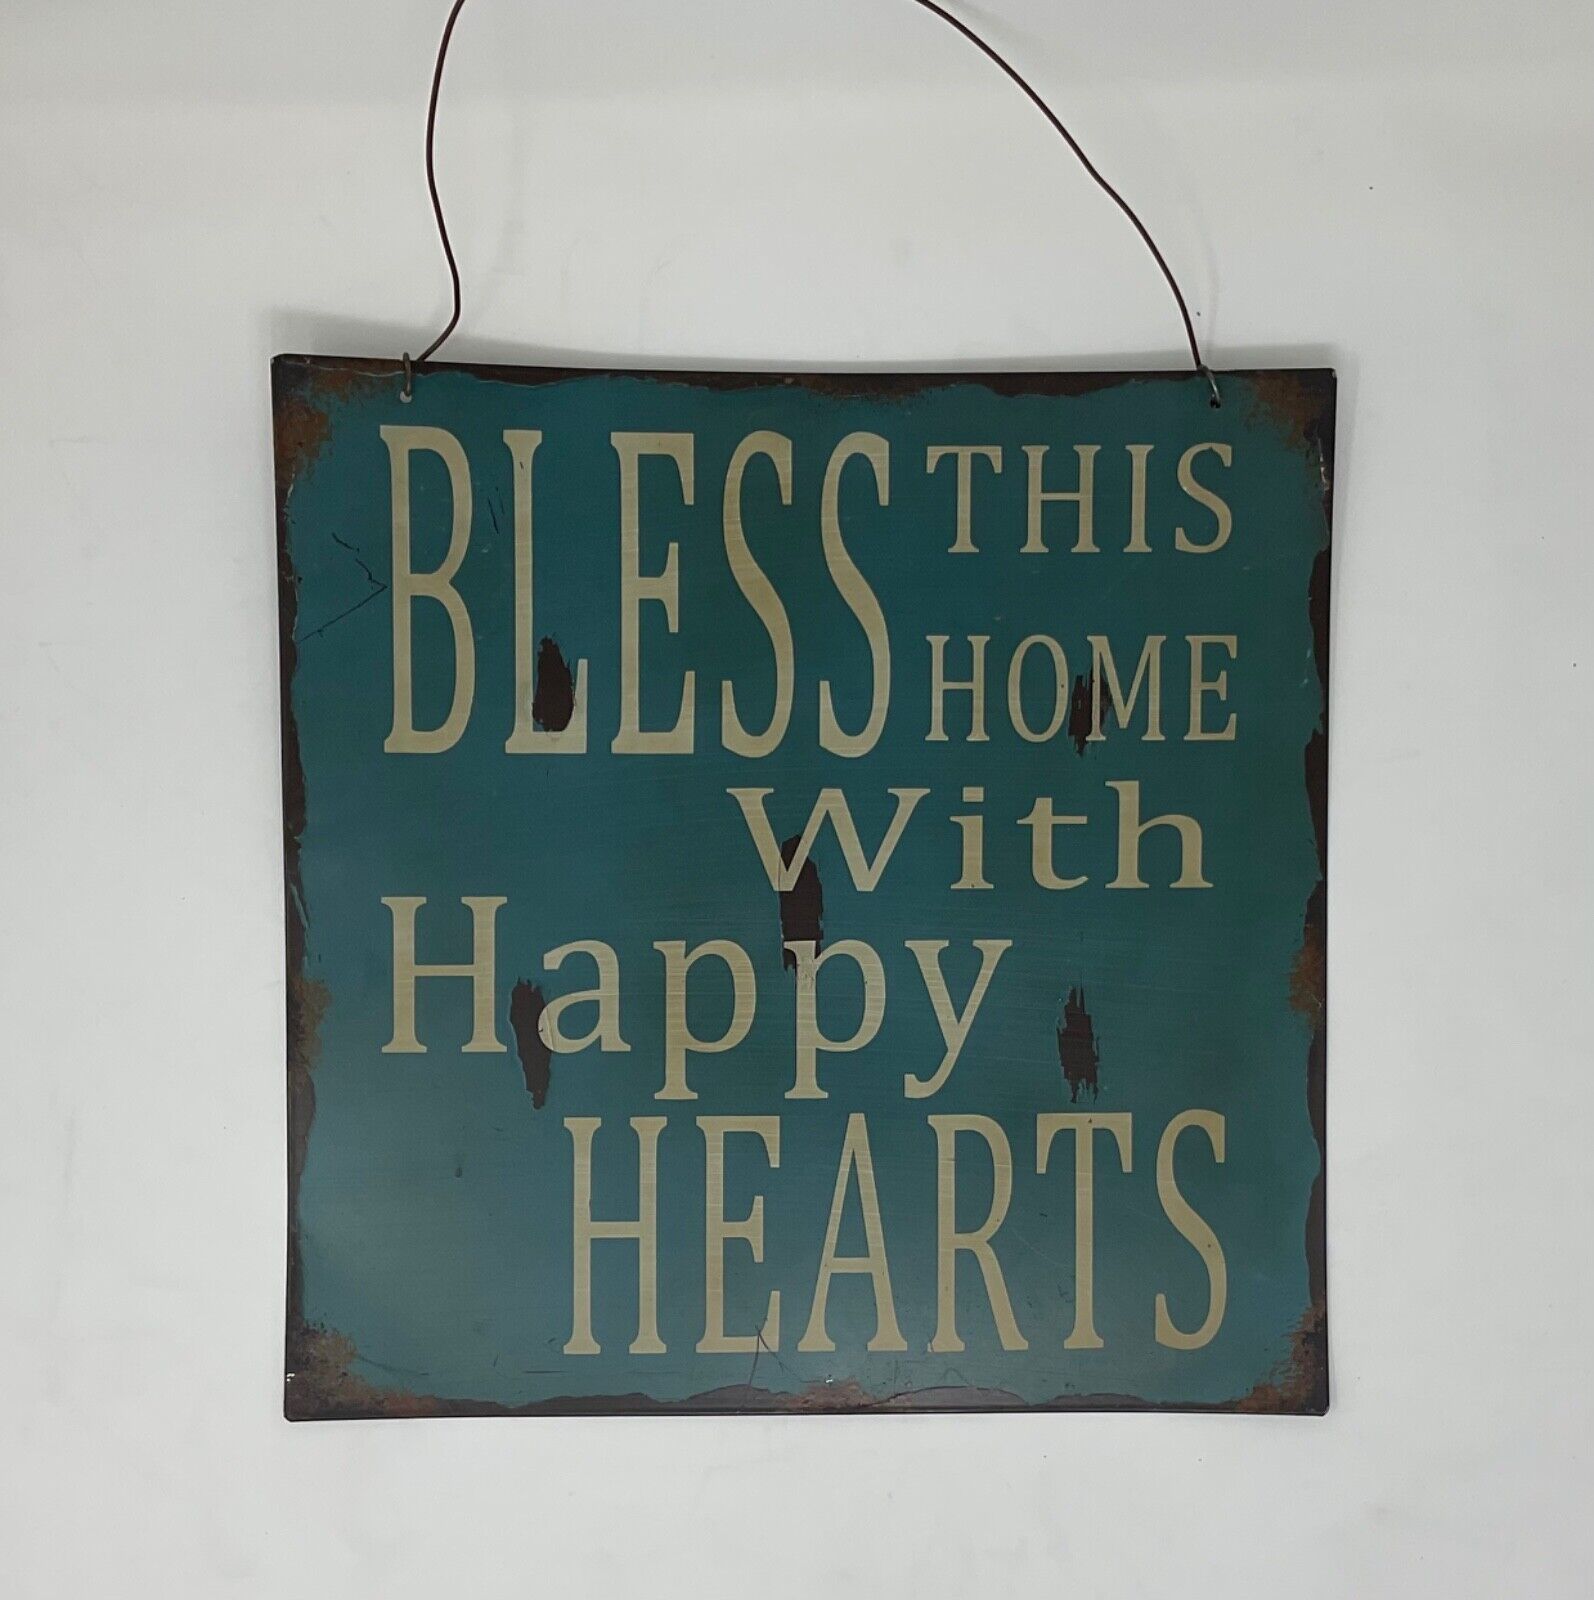 Primary image for 'Bless this Home wuth Happy Hearts' Metal Wall Décor